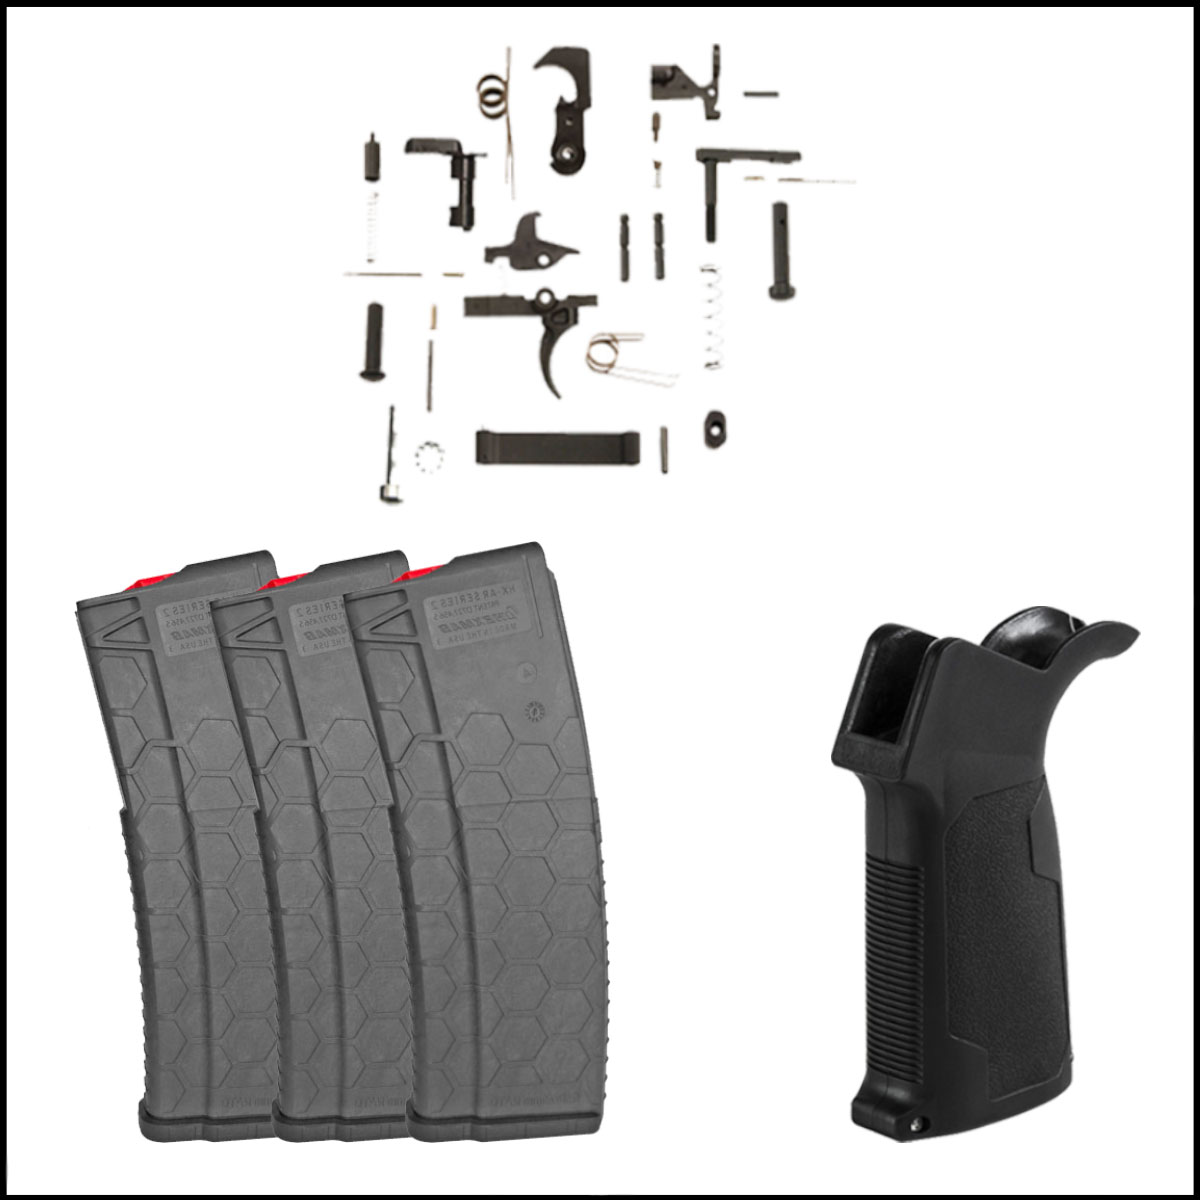 Stocking Stuffer Lower Starting Kits: SENTRY Dark Grey Finish, Red Follower and Latch Plate, 3-Pack + Recoil Technologies AR-15 Lower Parts Kit + VISM AR-15 M4 Polymer Pistol Grip W/ Bottom Storage Compartment